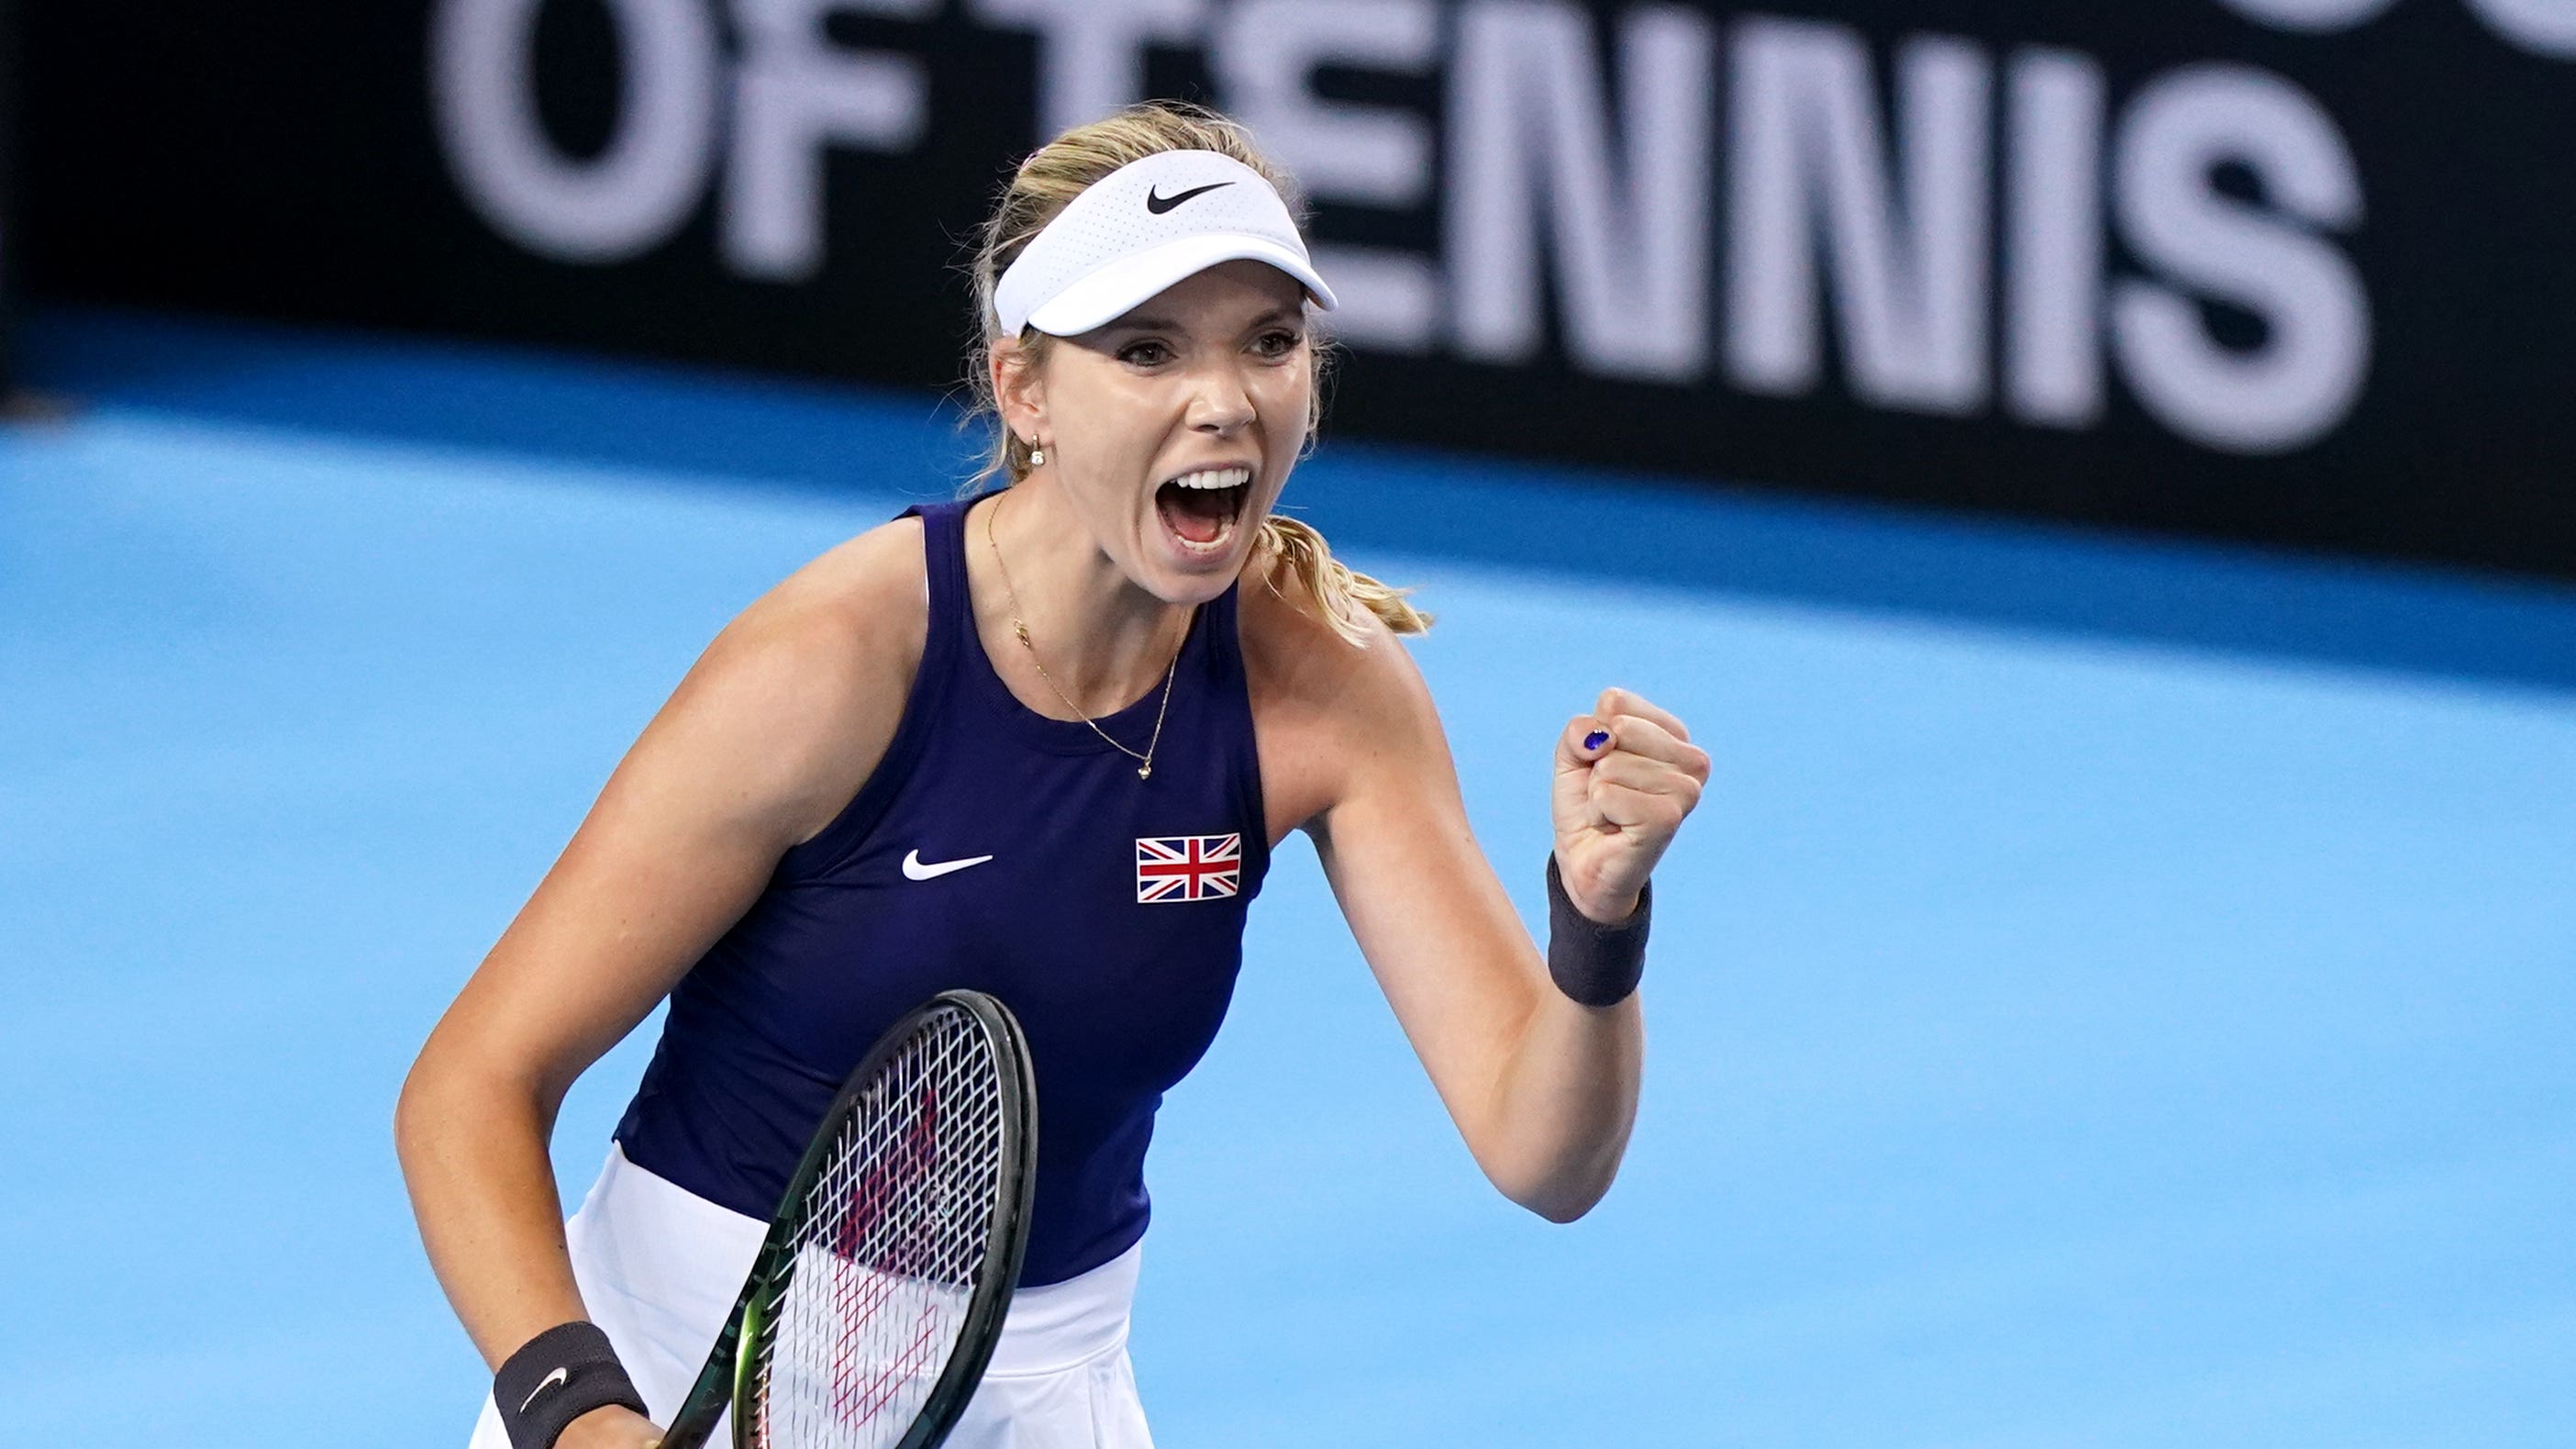 Great Britain drawn against Germany in round one of Billie Jean King Cup Finals